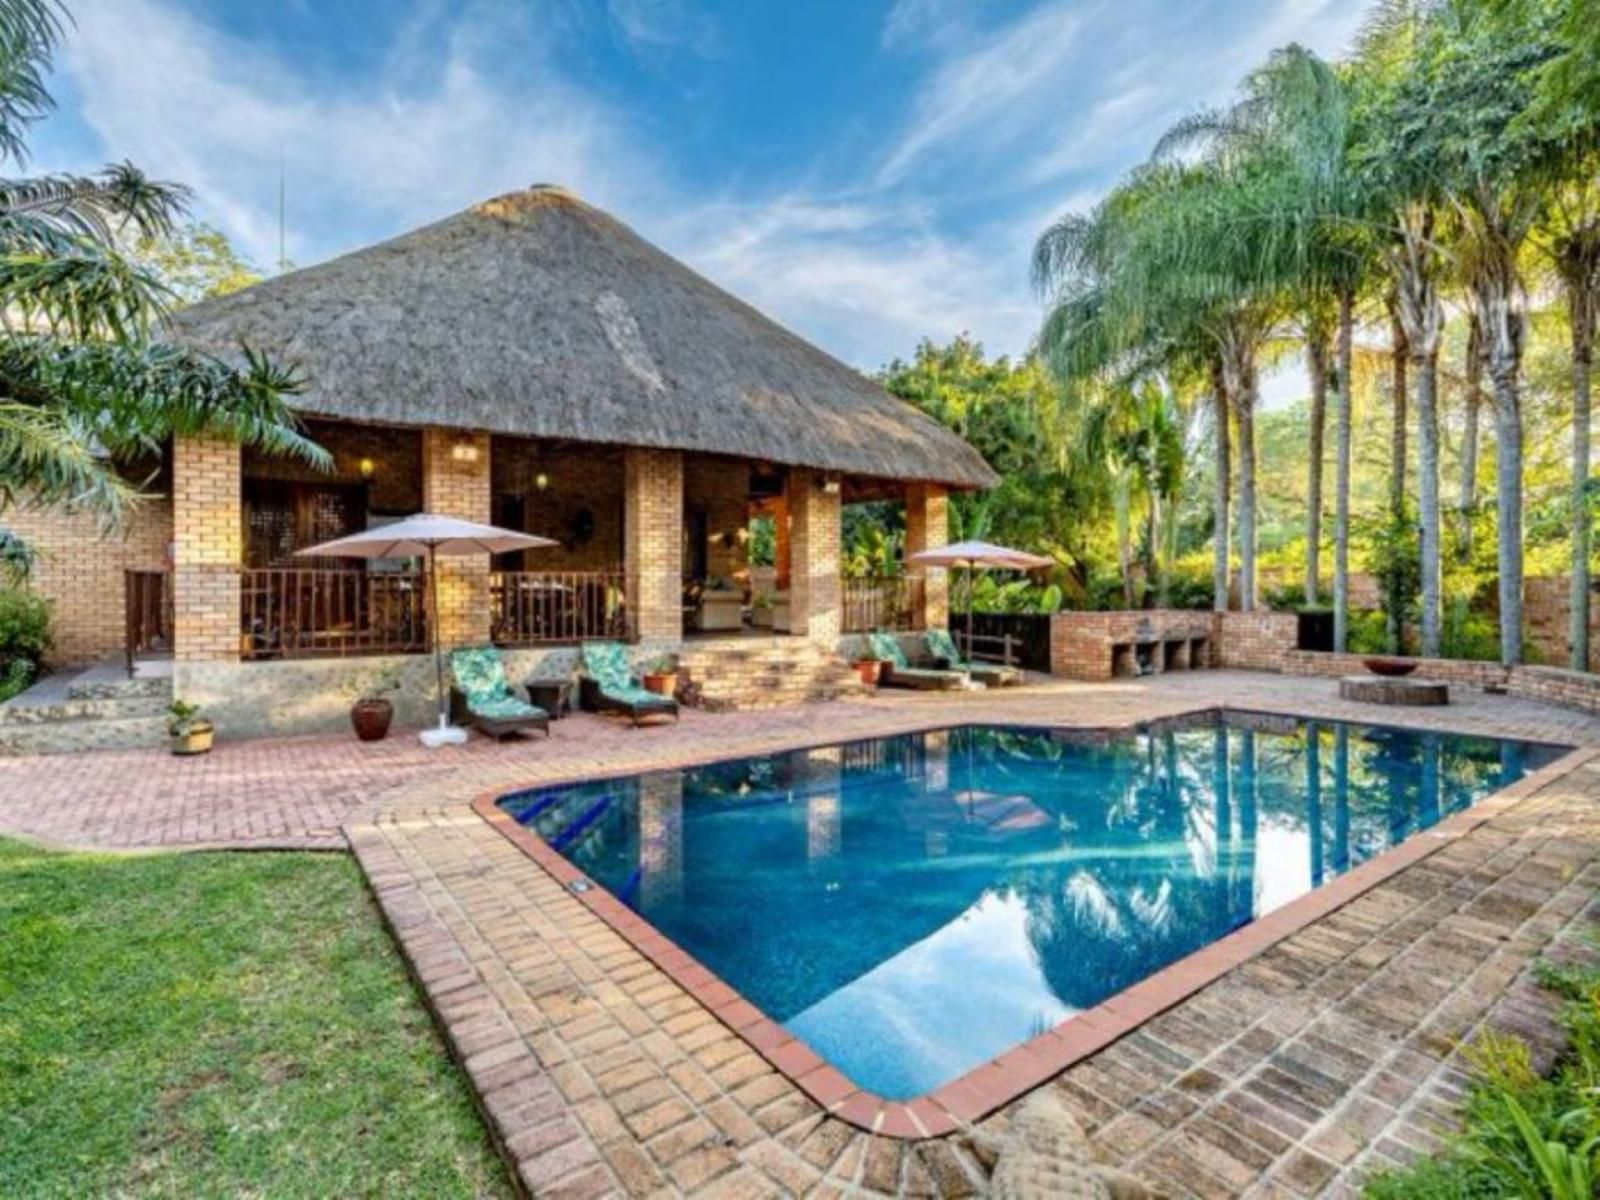 Dreamfields Guesthouse Hazyview Mpumalanga South Africa Complementary Colors, Palm Tree, Plant, Nature, Wood, Swimming Pool